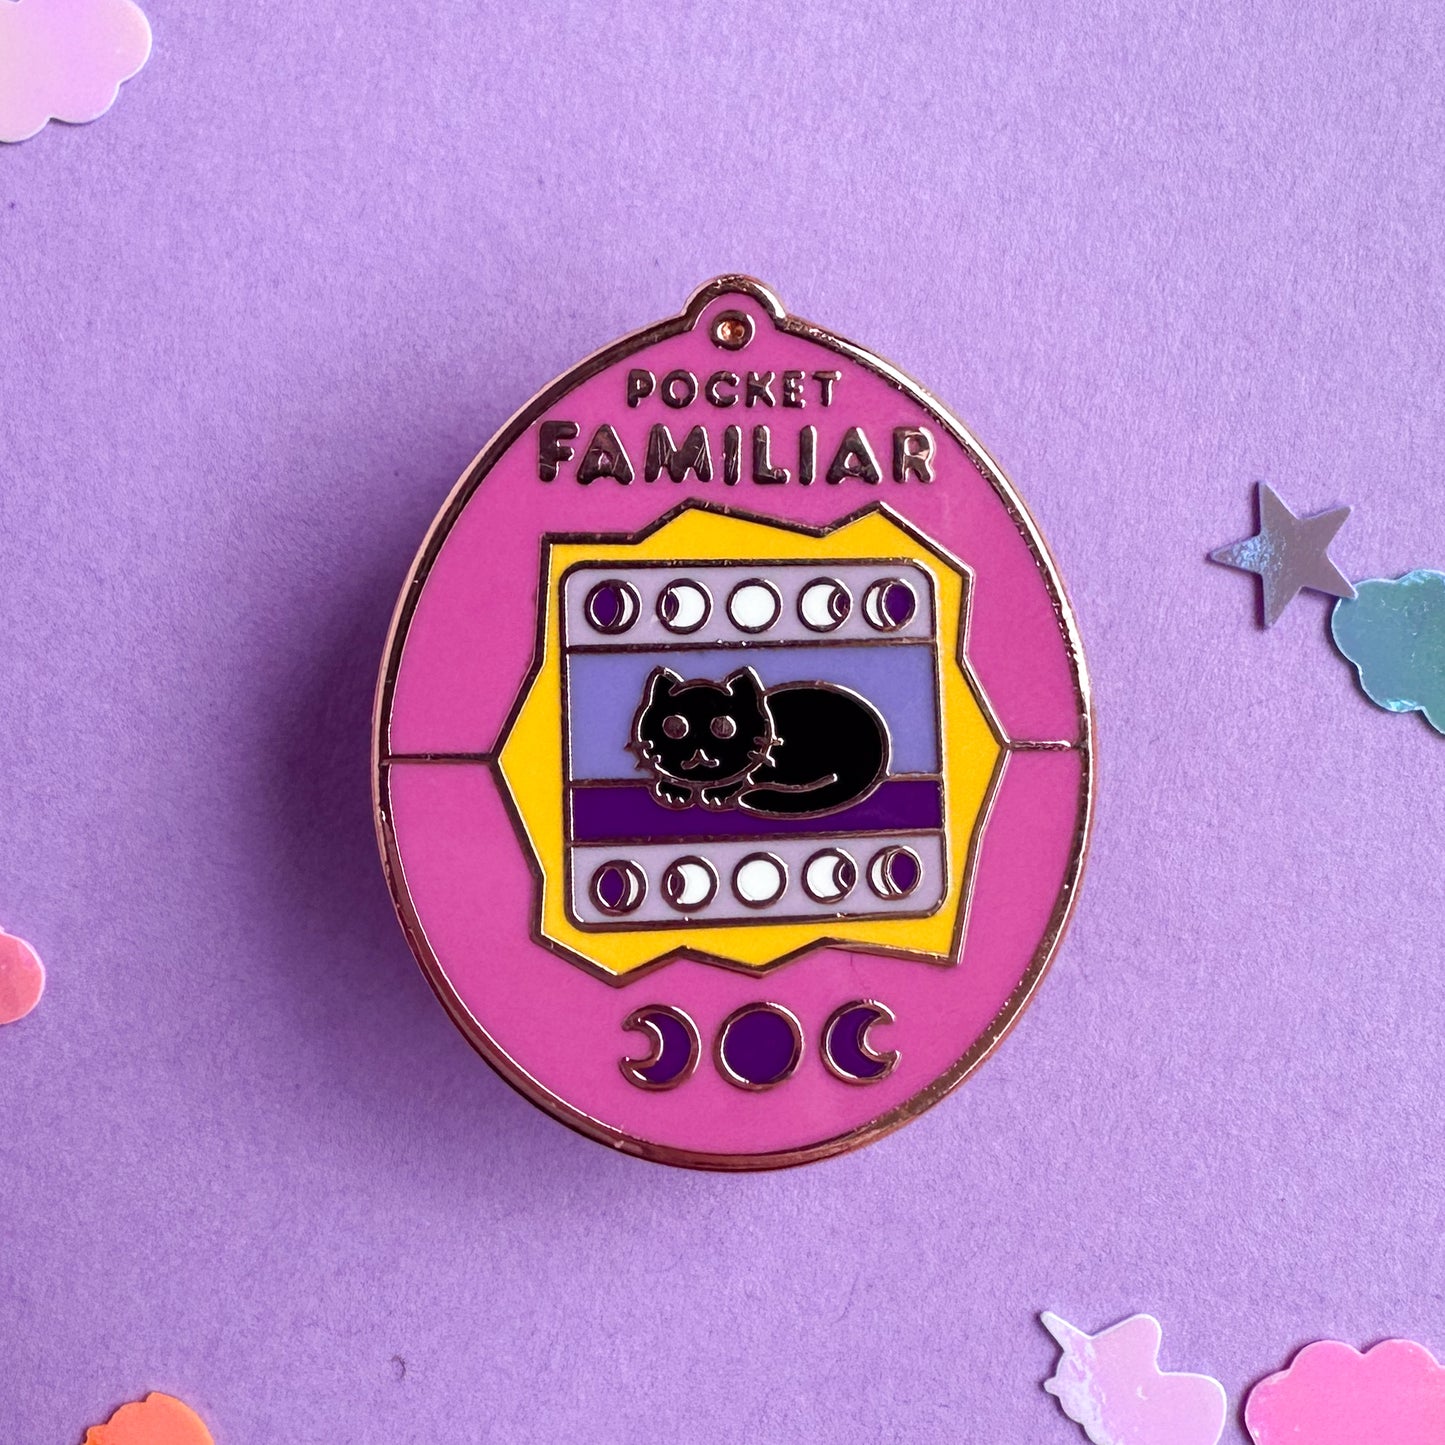 The pocket familiar pink virtual pet pin on a lavender confetti background.